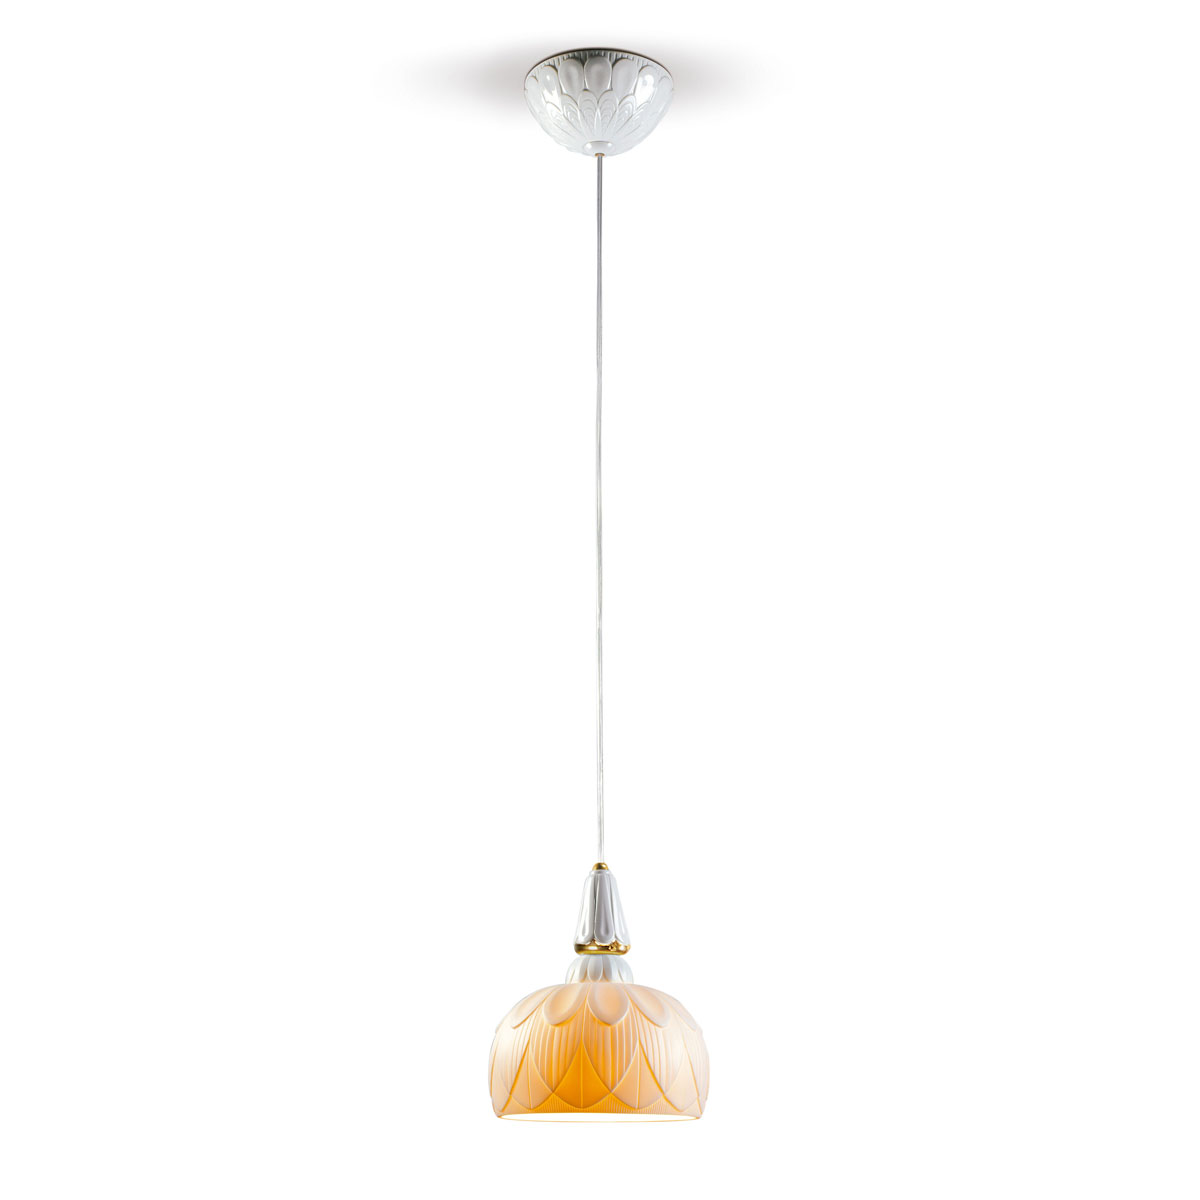 Lladro Classic Lighting, Ivy And Seed Single Ceiling Lamp. Golden Luster